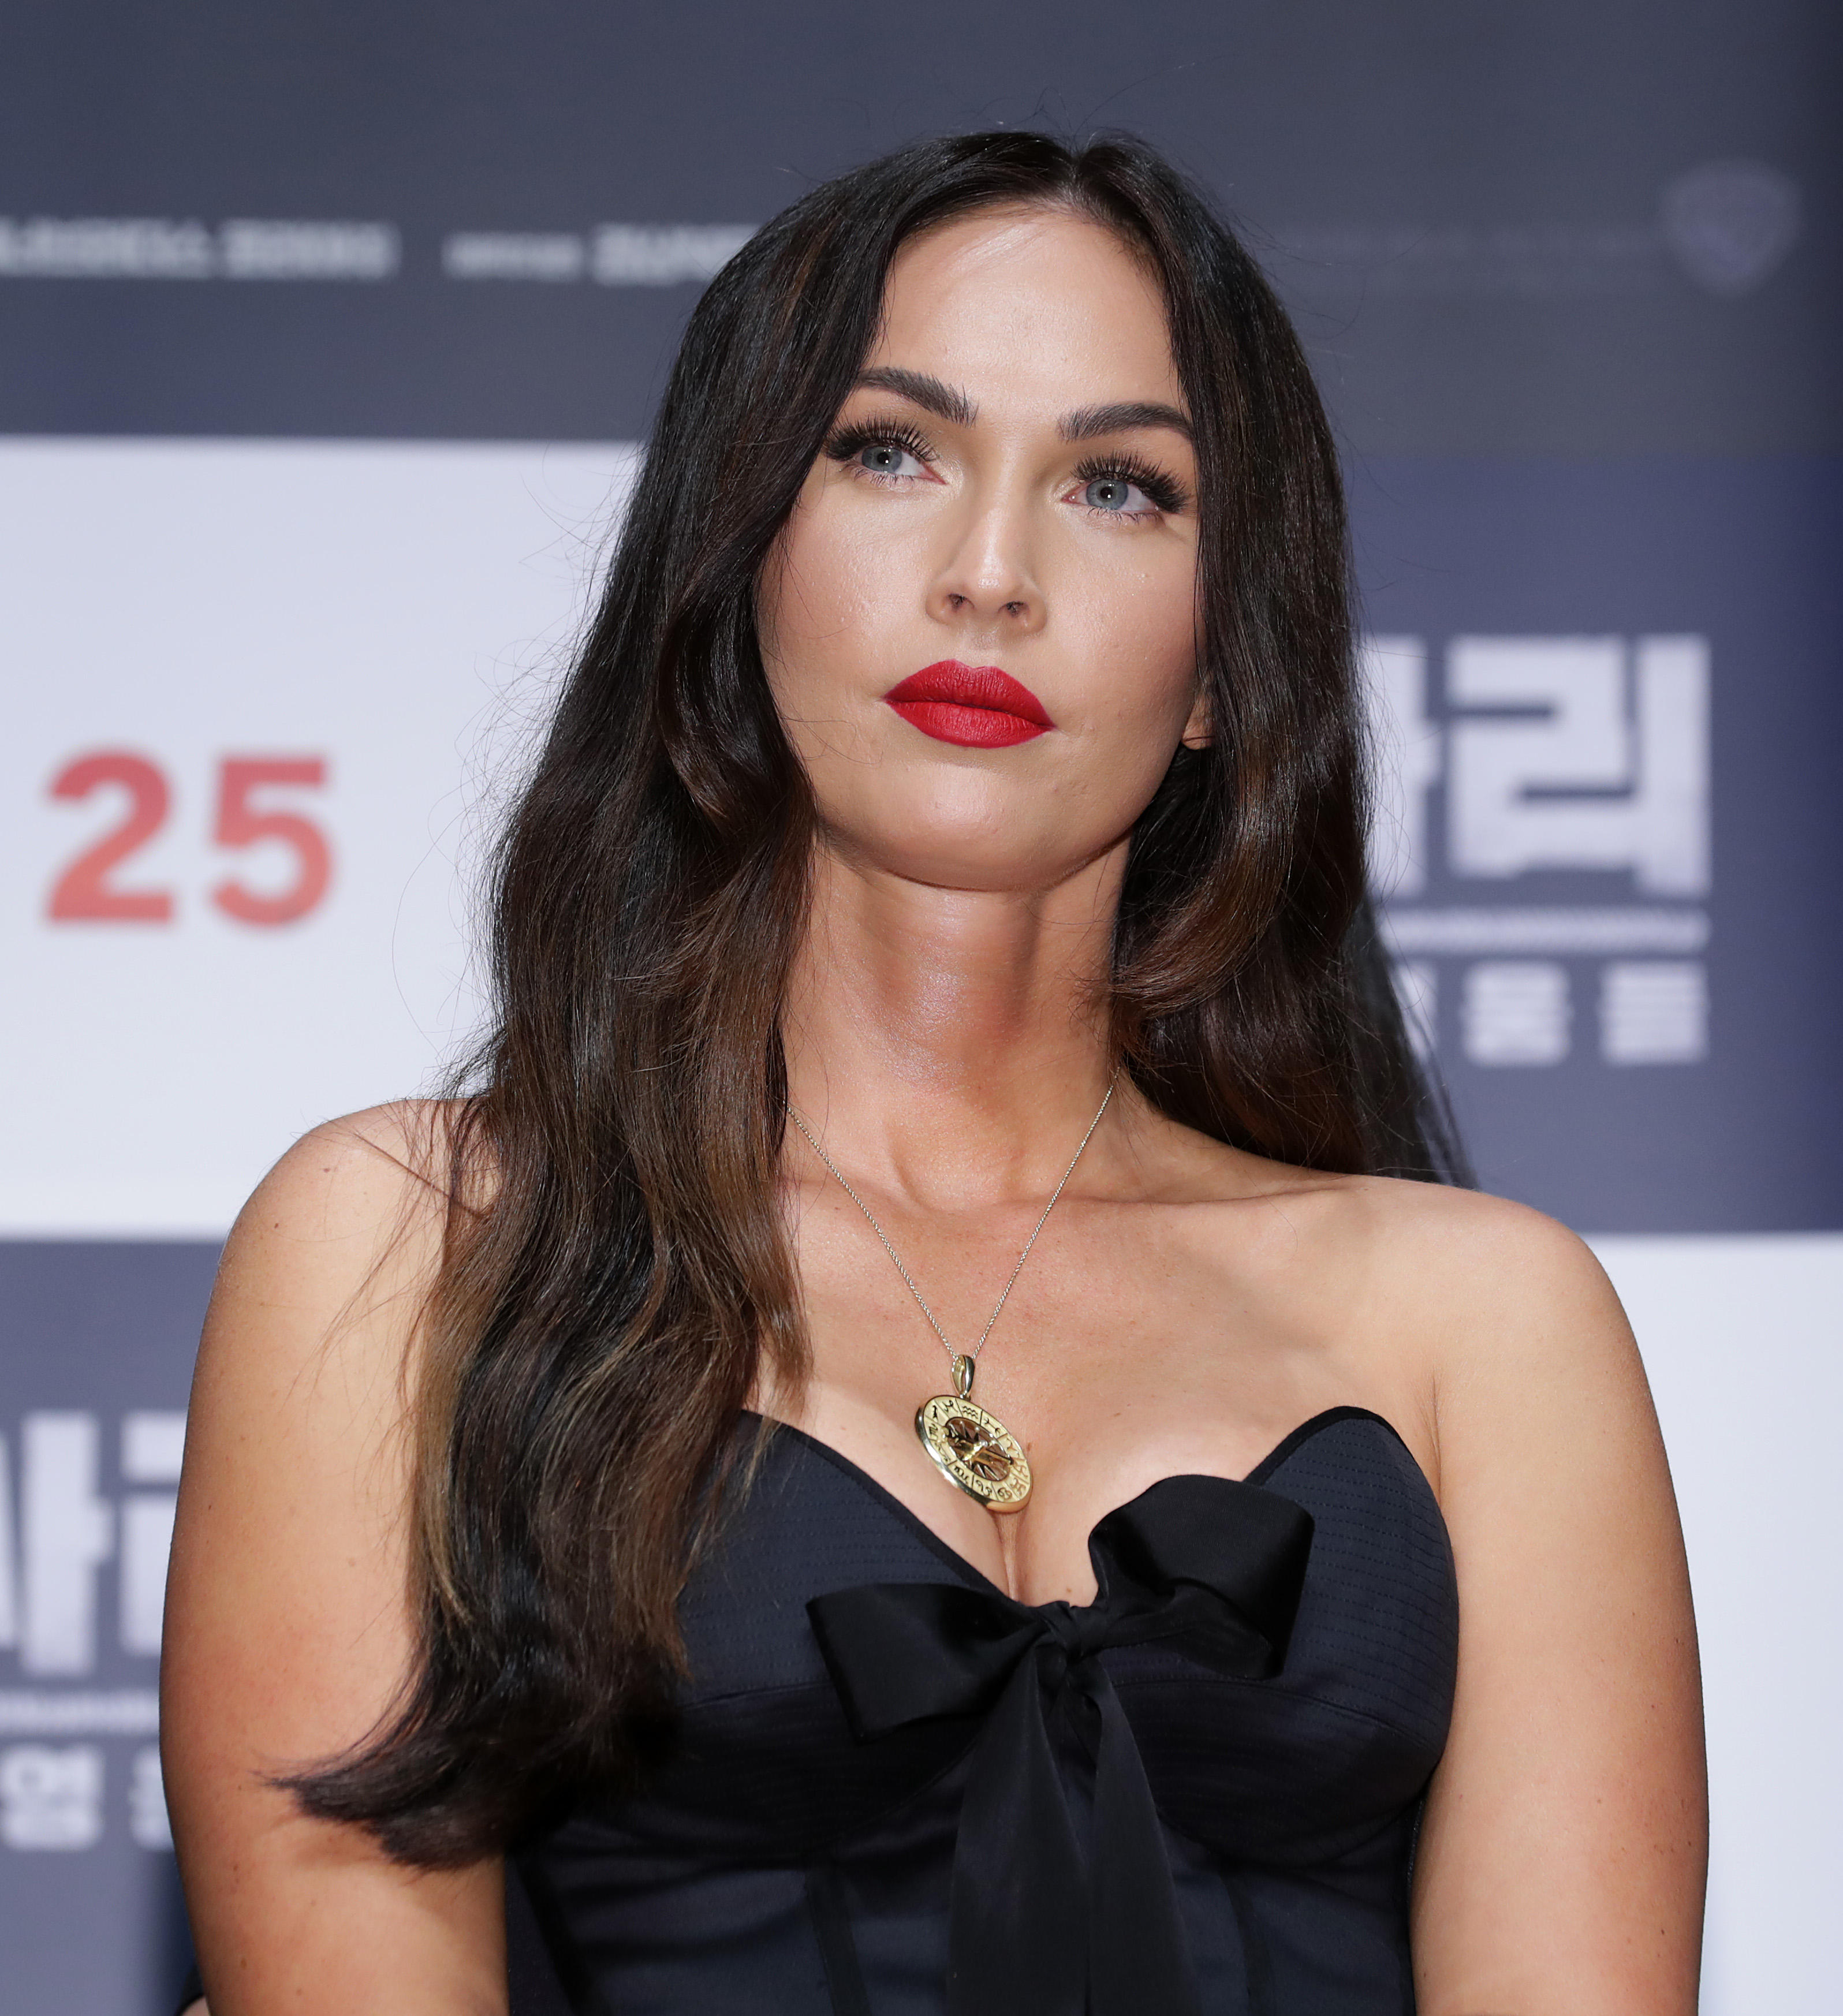 Megan Fox poses at an event in a dress with a bow detail